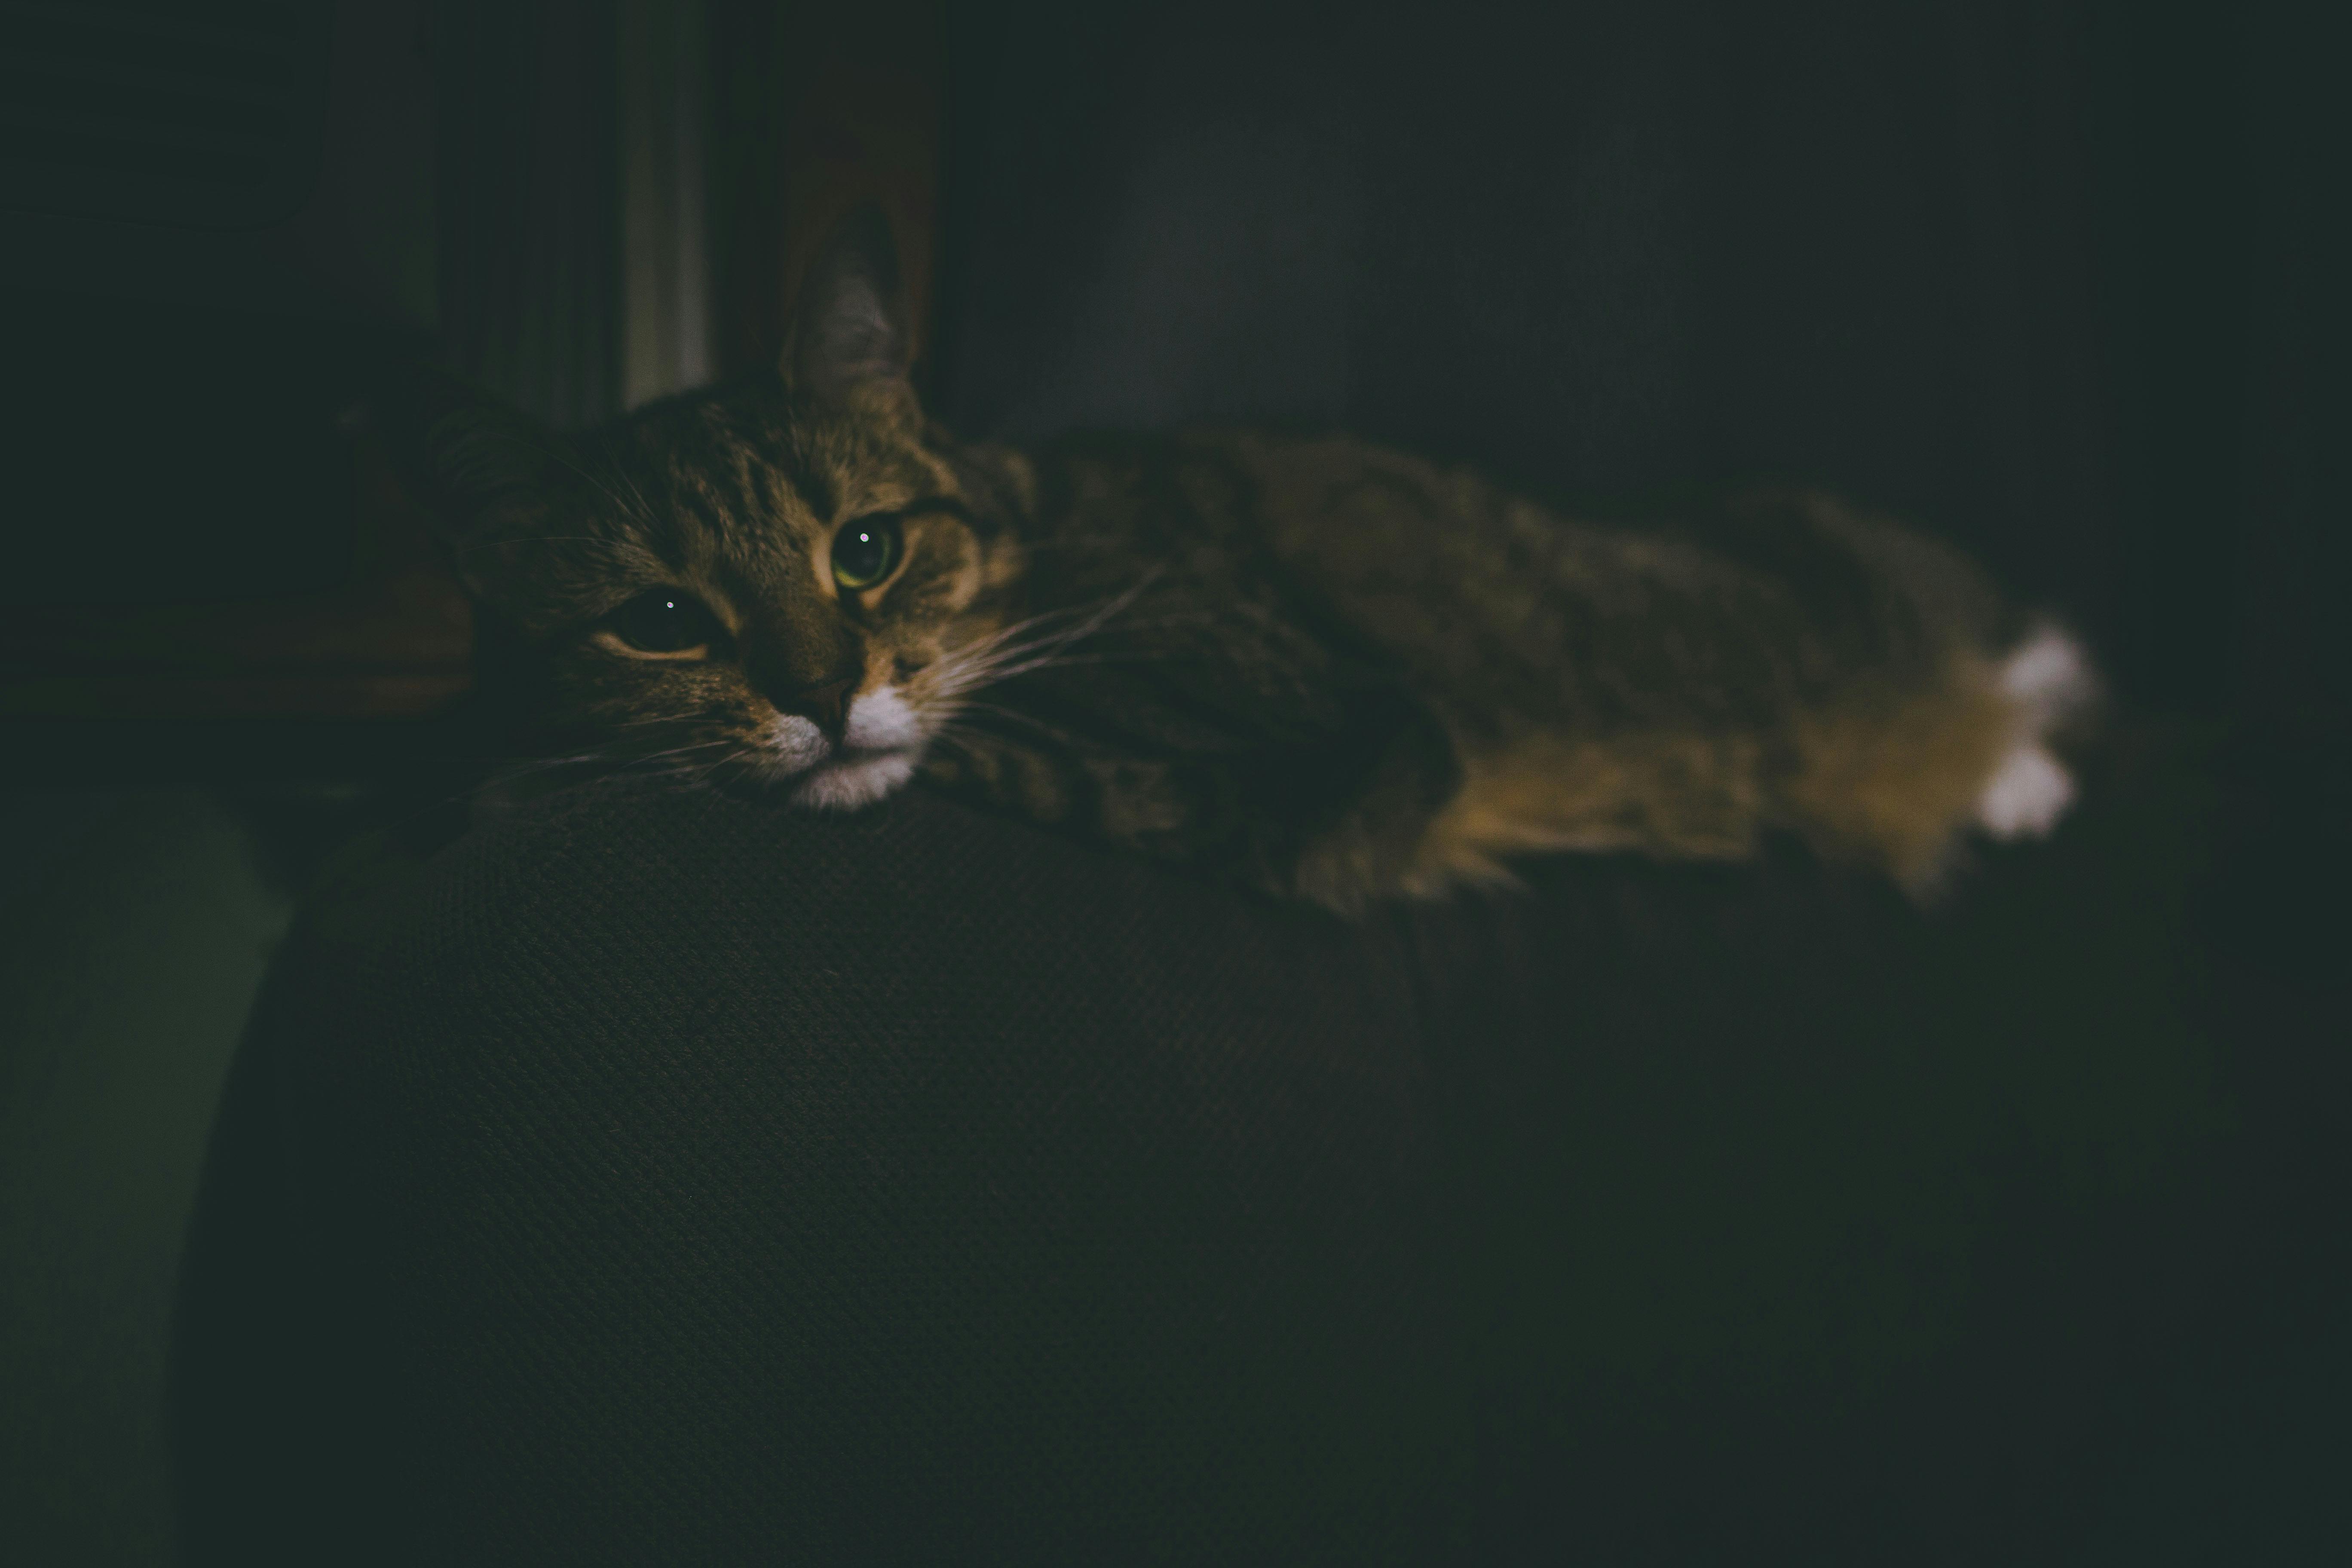 Brown Cat With Green Eyes · Free Stock Photo - 5472 x 3648 jpeg 1049kB